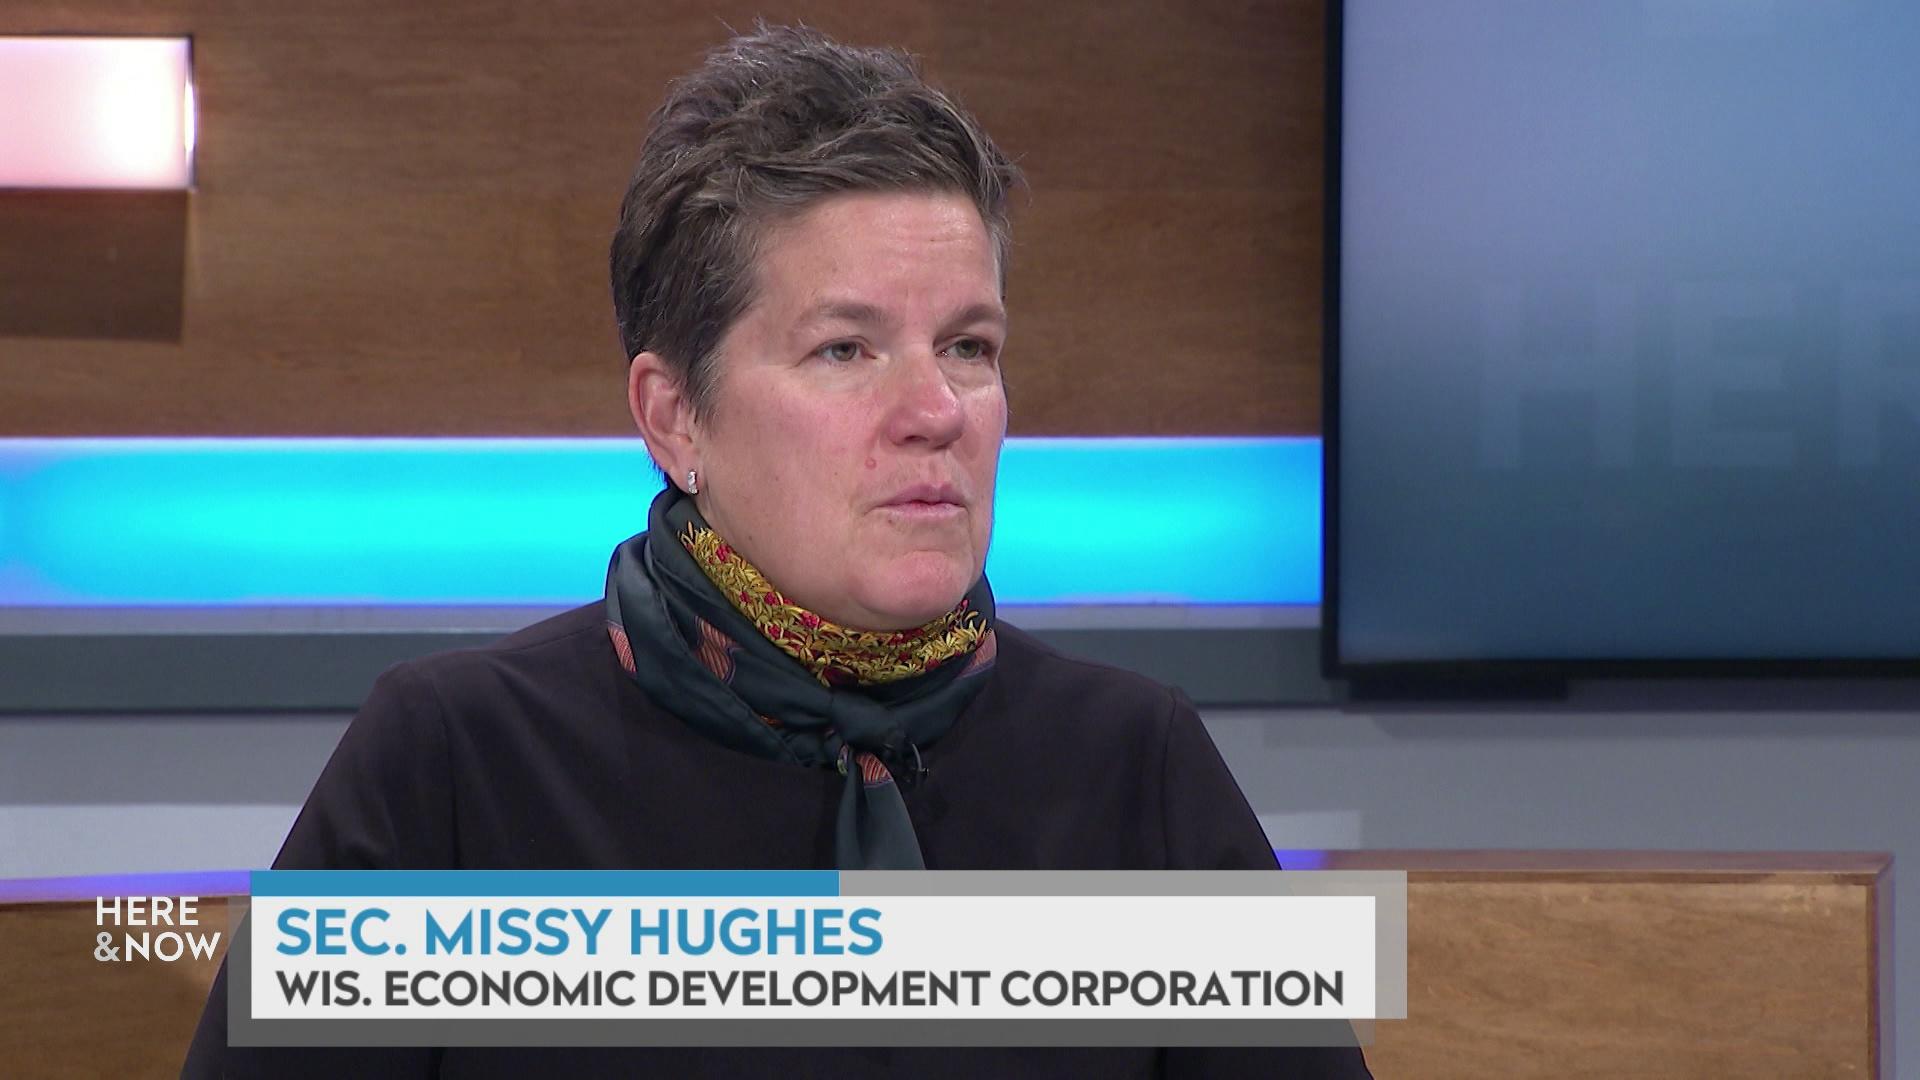 A still image shows Missy Hughes seated at the 'Here & Now' set featuring wood paneling, with a graphic at bottom reading 'Missy Hughes' and 'Wis. Economic Development Corporation.'